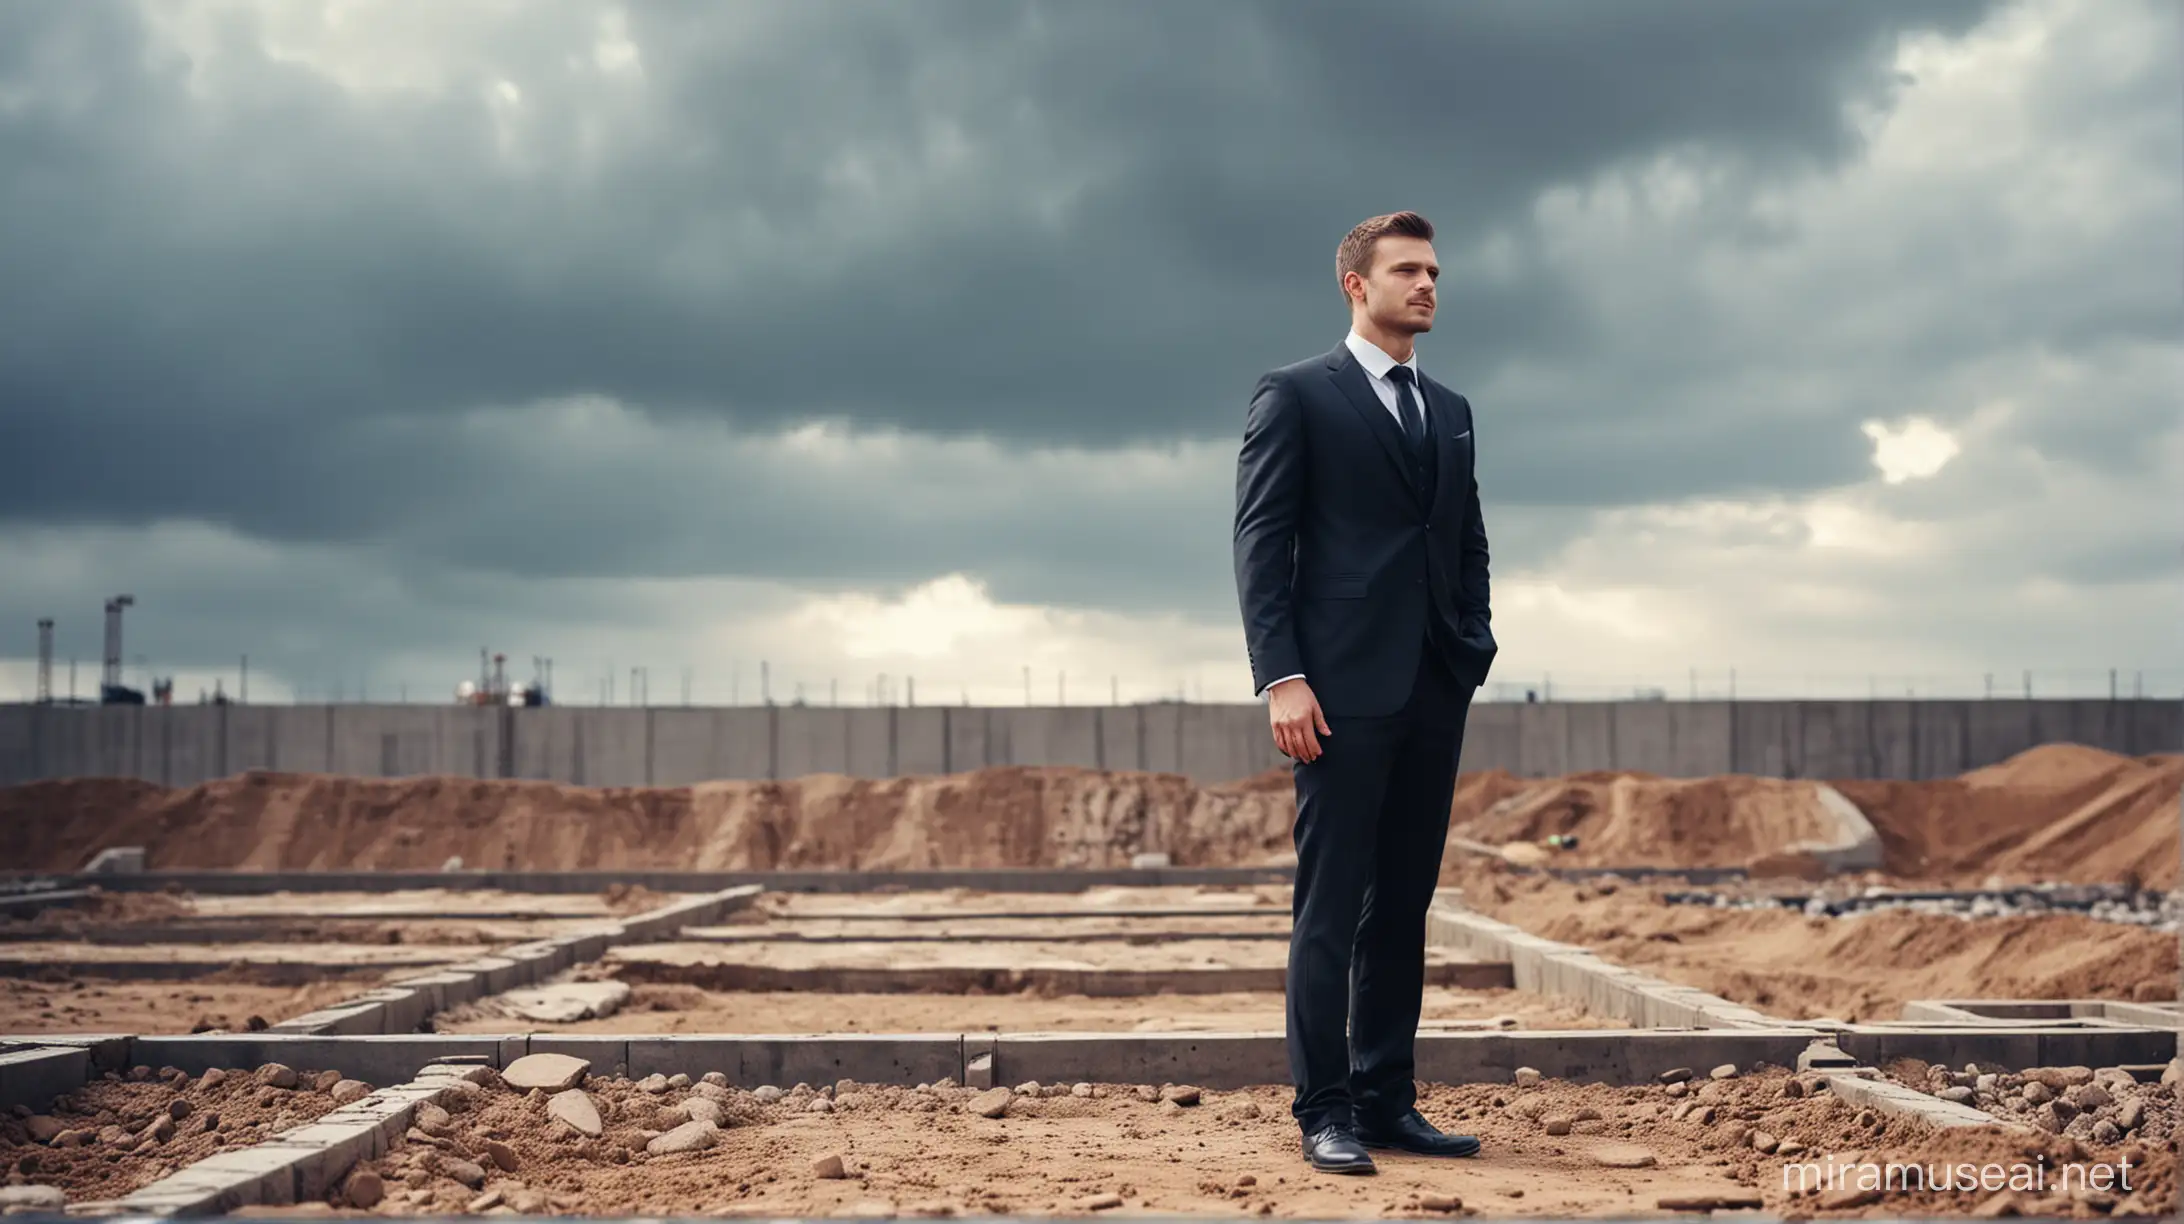 Businessman overseeing construction project with studio lighting in cloudy weather